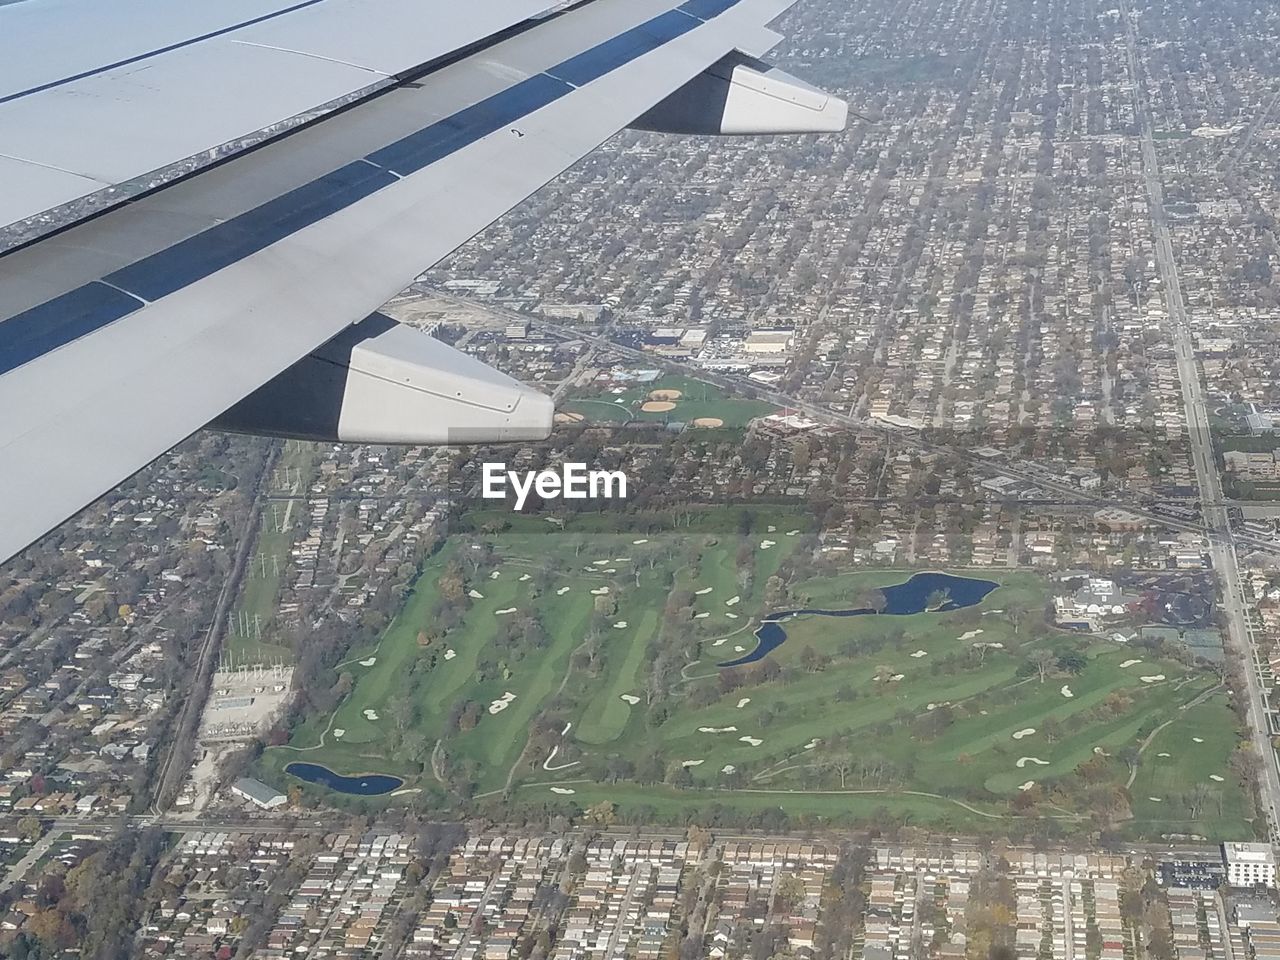 HIGH ANGLE VIEW OF CITYSCAPE SEEN THROUGH AIRPLANE